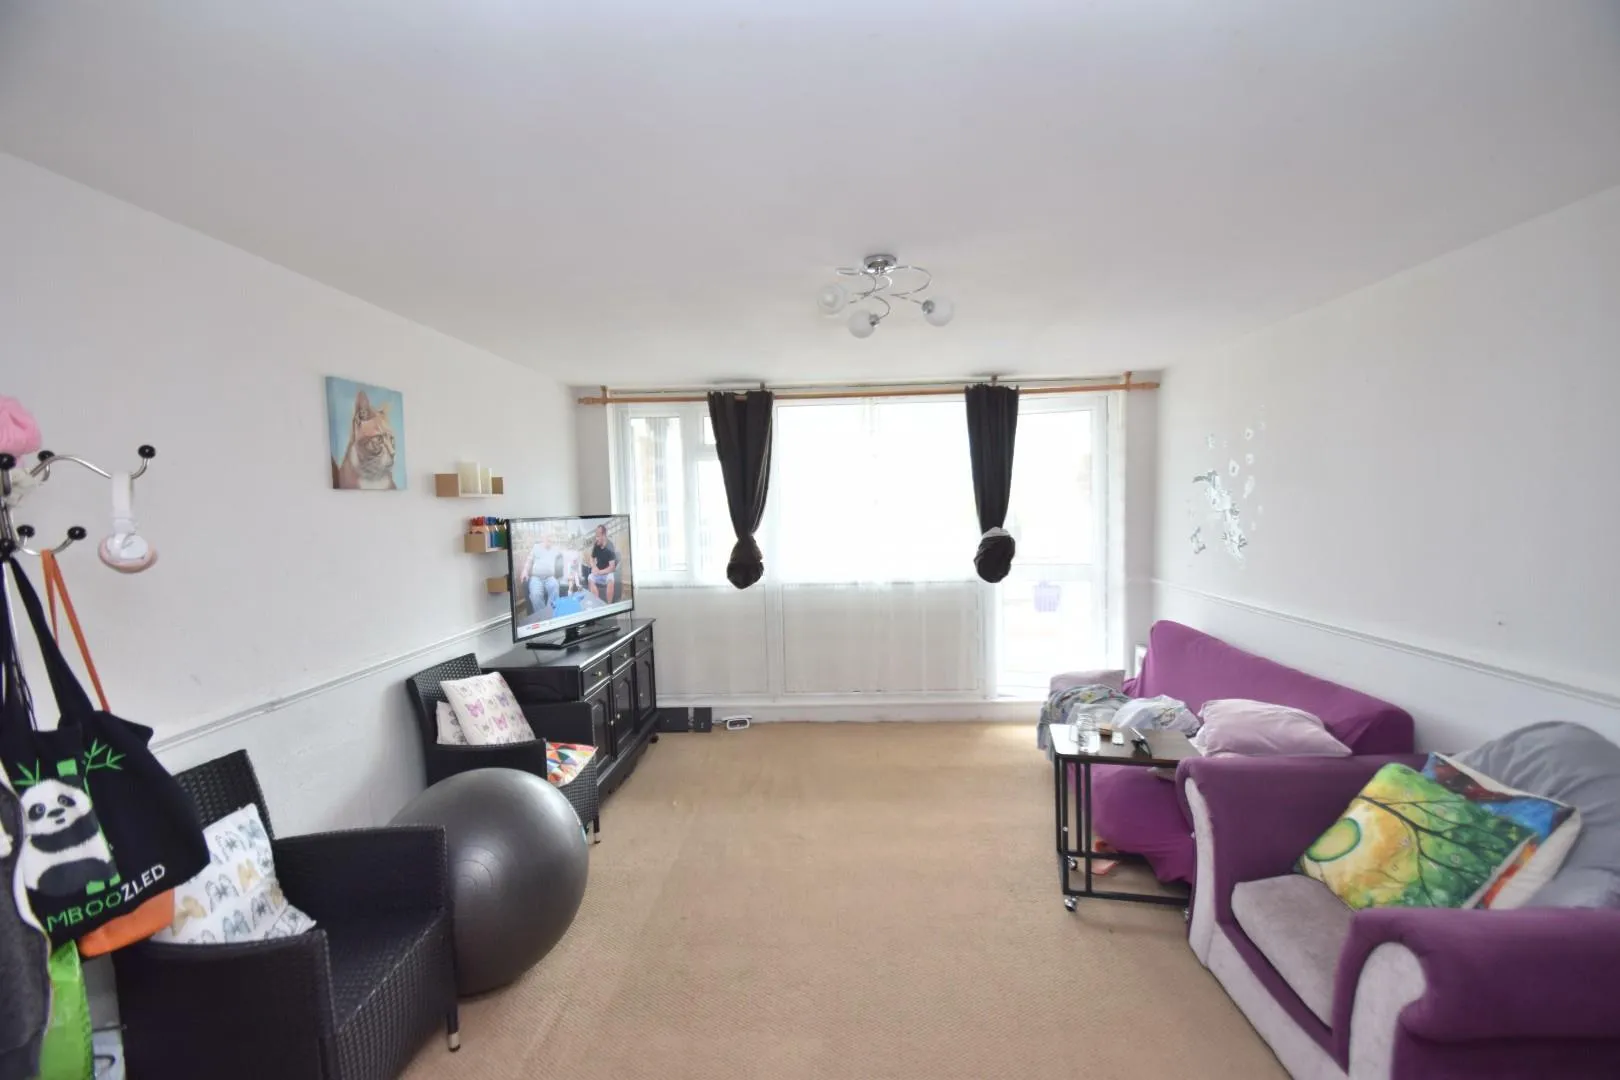 For Sale: Eastbourne condo flat